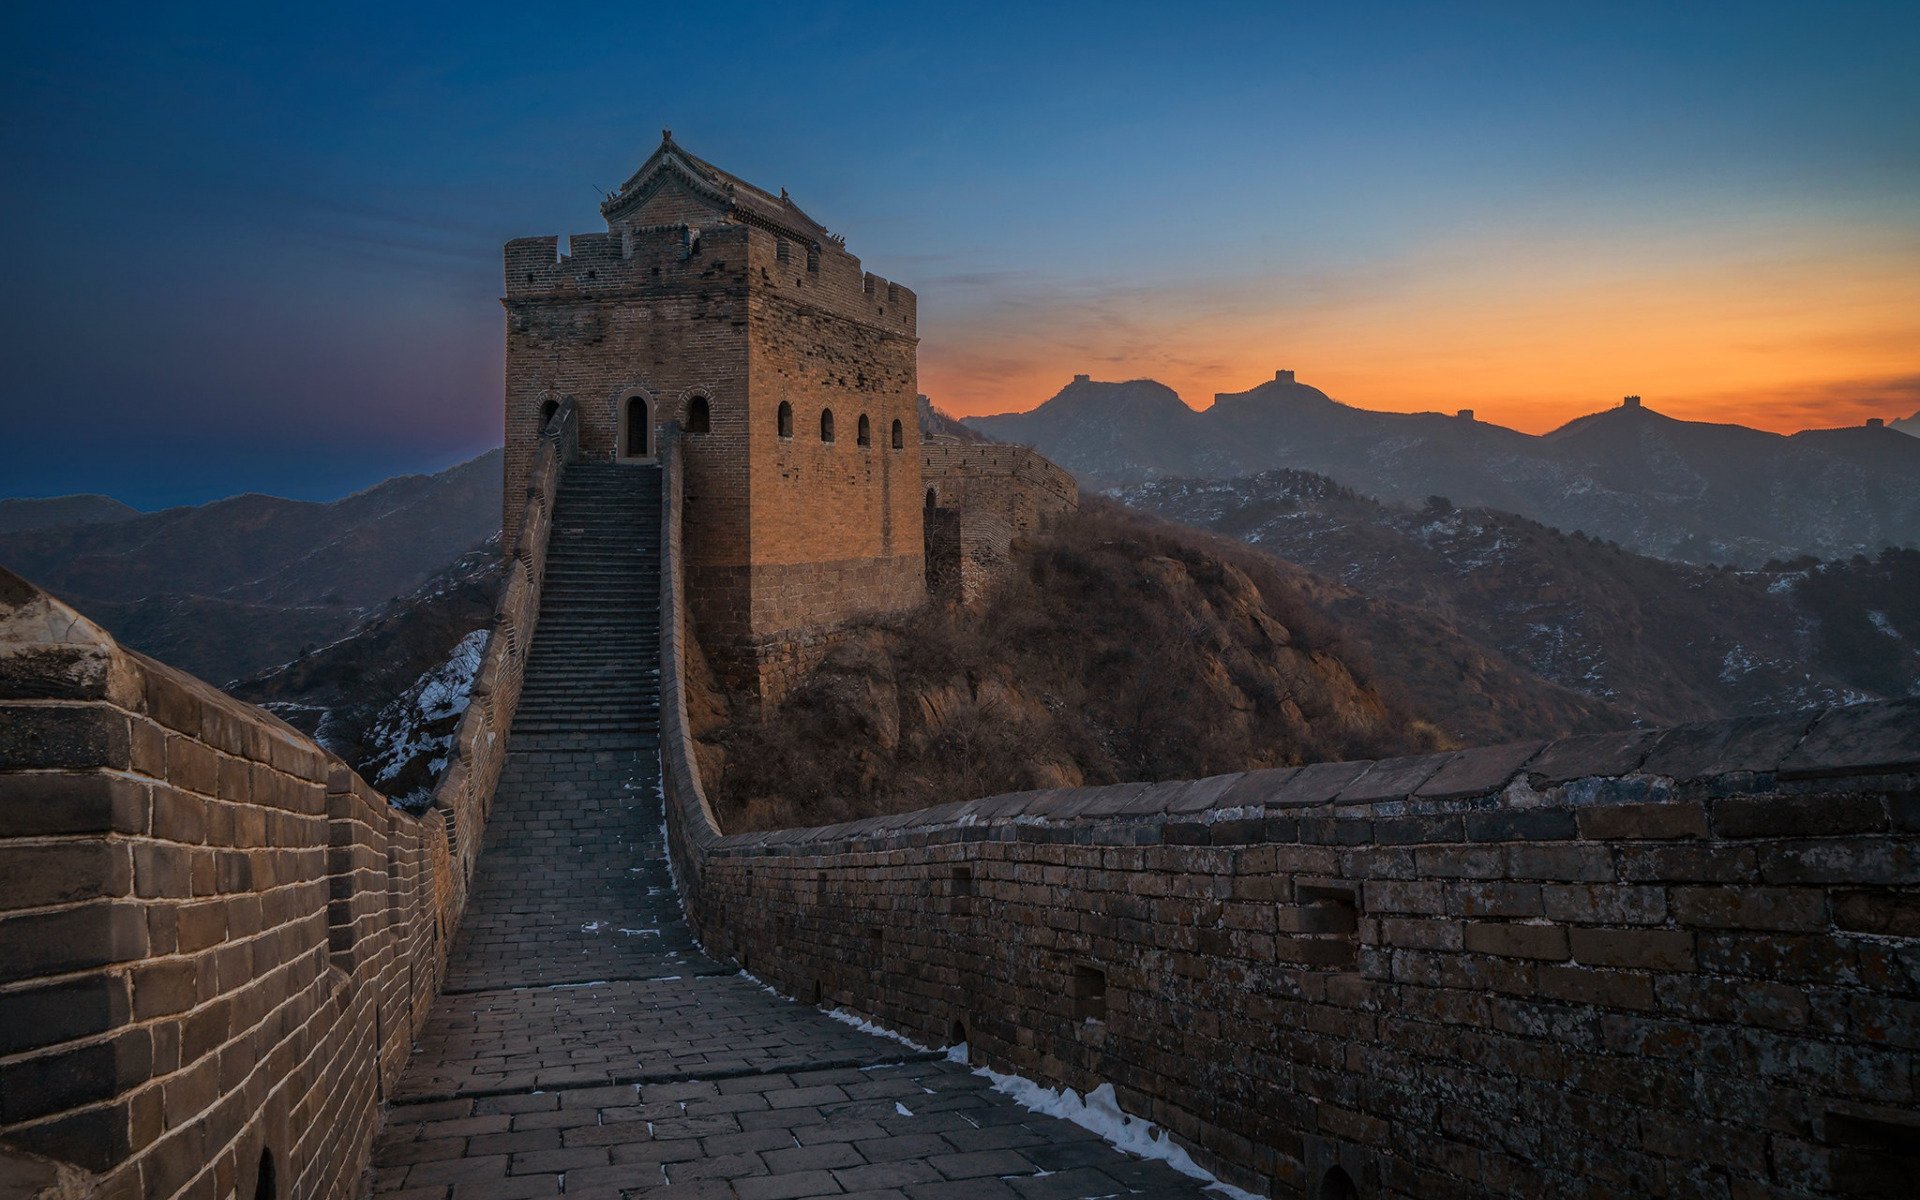 Download wallpapers Jinshanling, Great Wall of China, Luanping County,  Chengde City, Hebei Province, evening, sunset, mountain landscape, skyline,  China for desktop with resolution 2880x1800. High Quality HD pictures  wallpapers